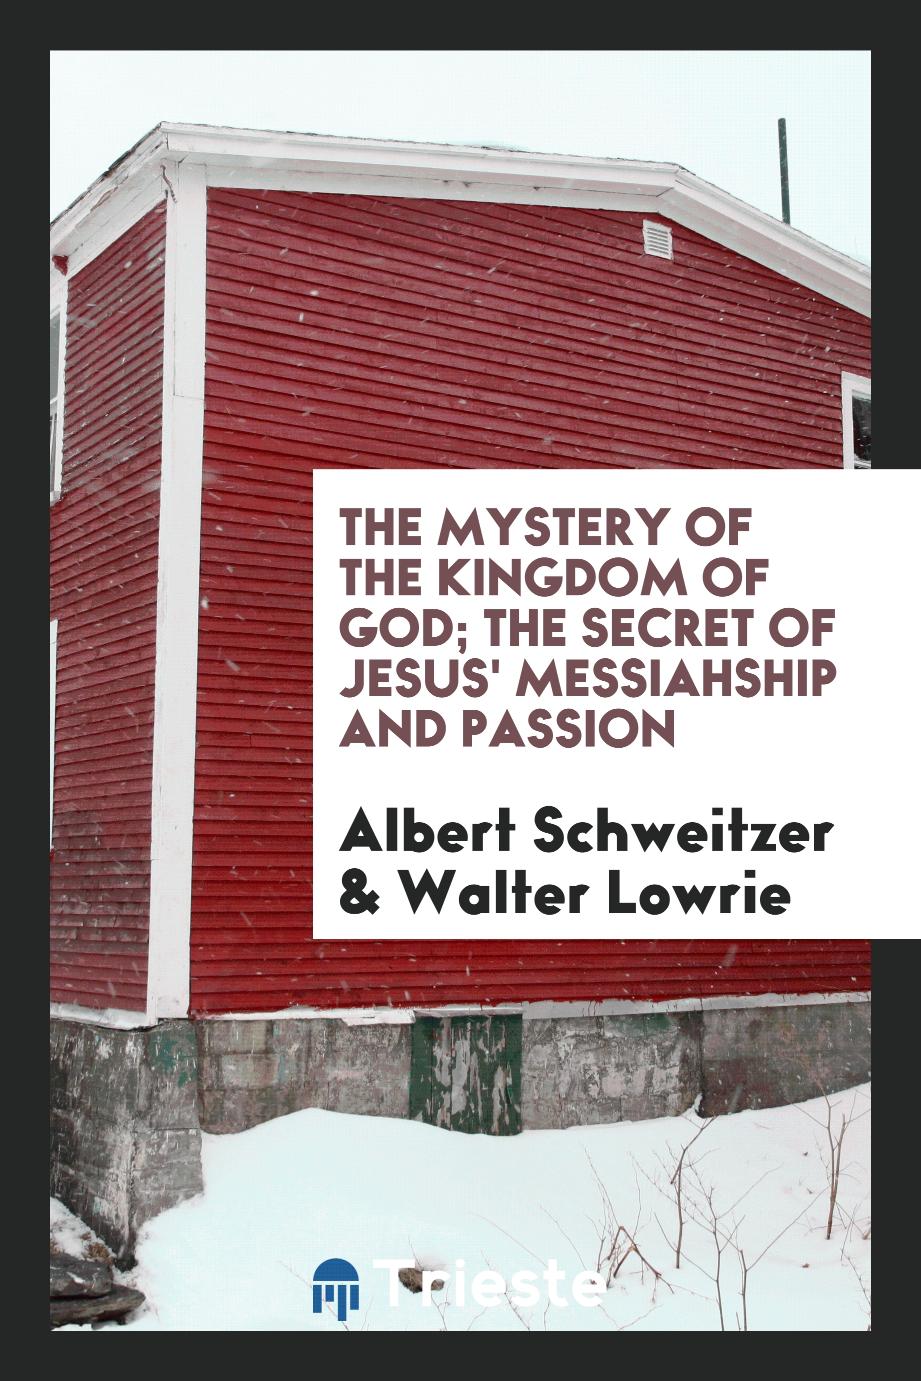 The mystery of the kingdom of God; the secret of Jesus' Messiahship and passion